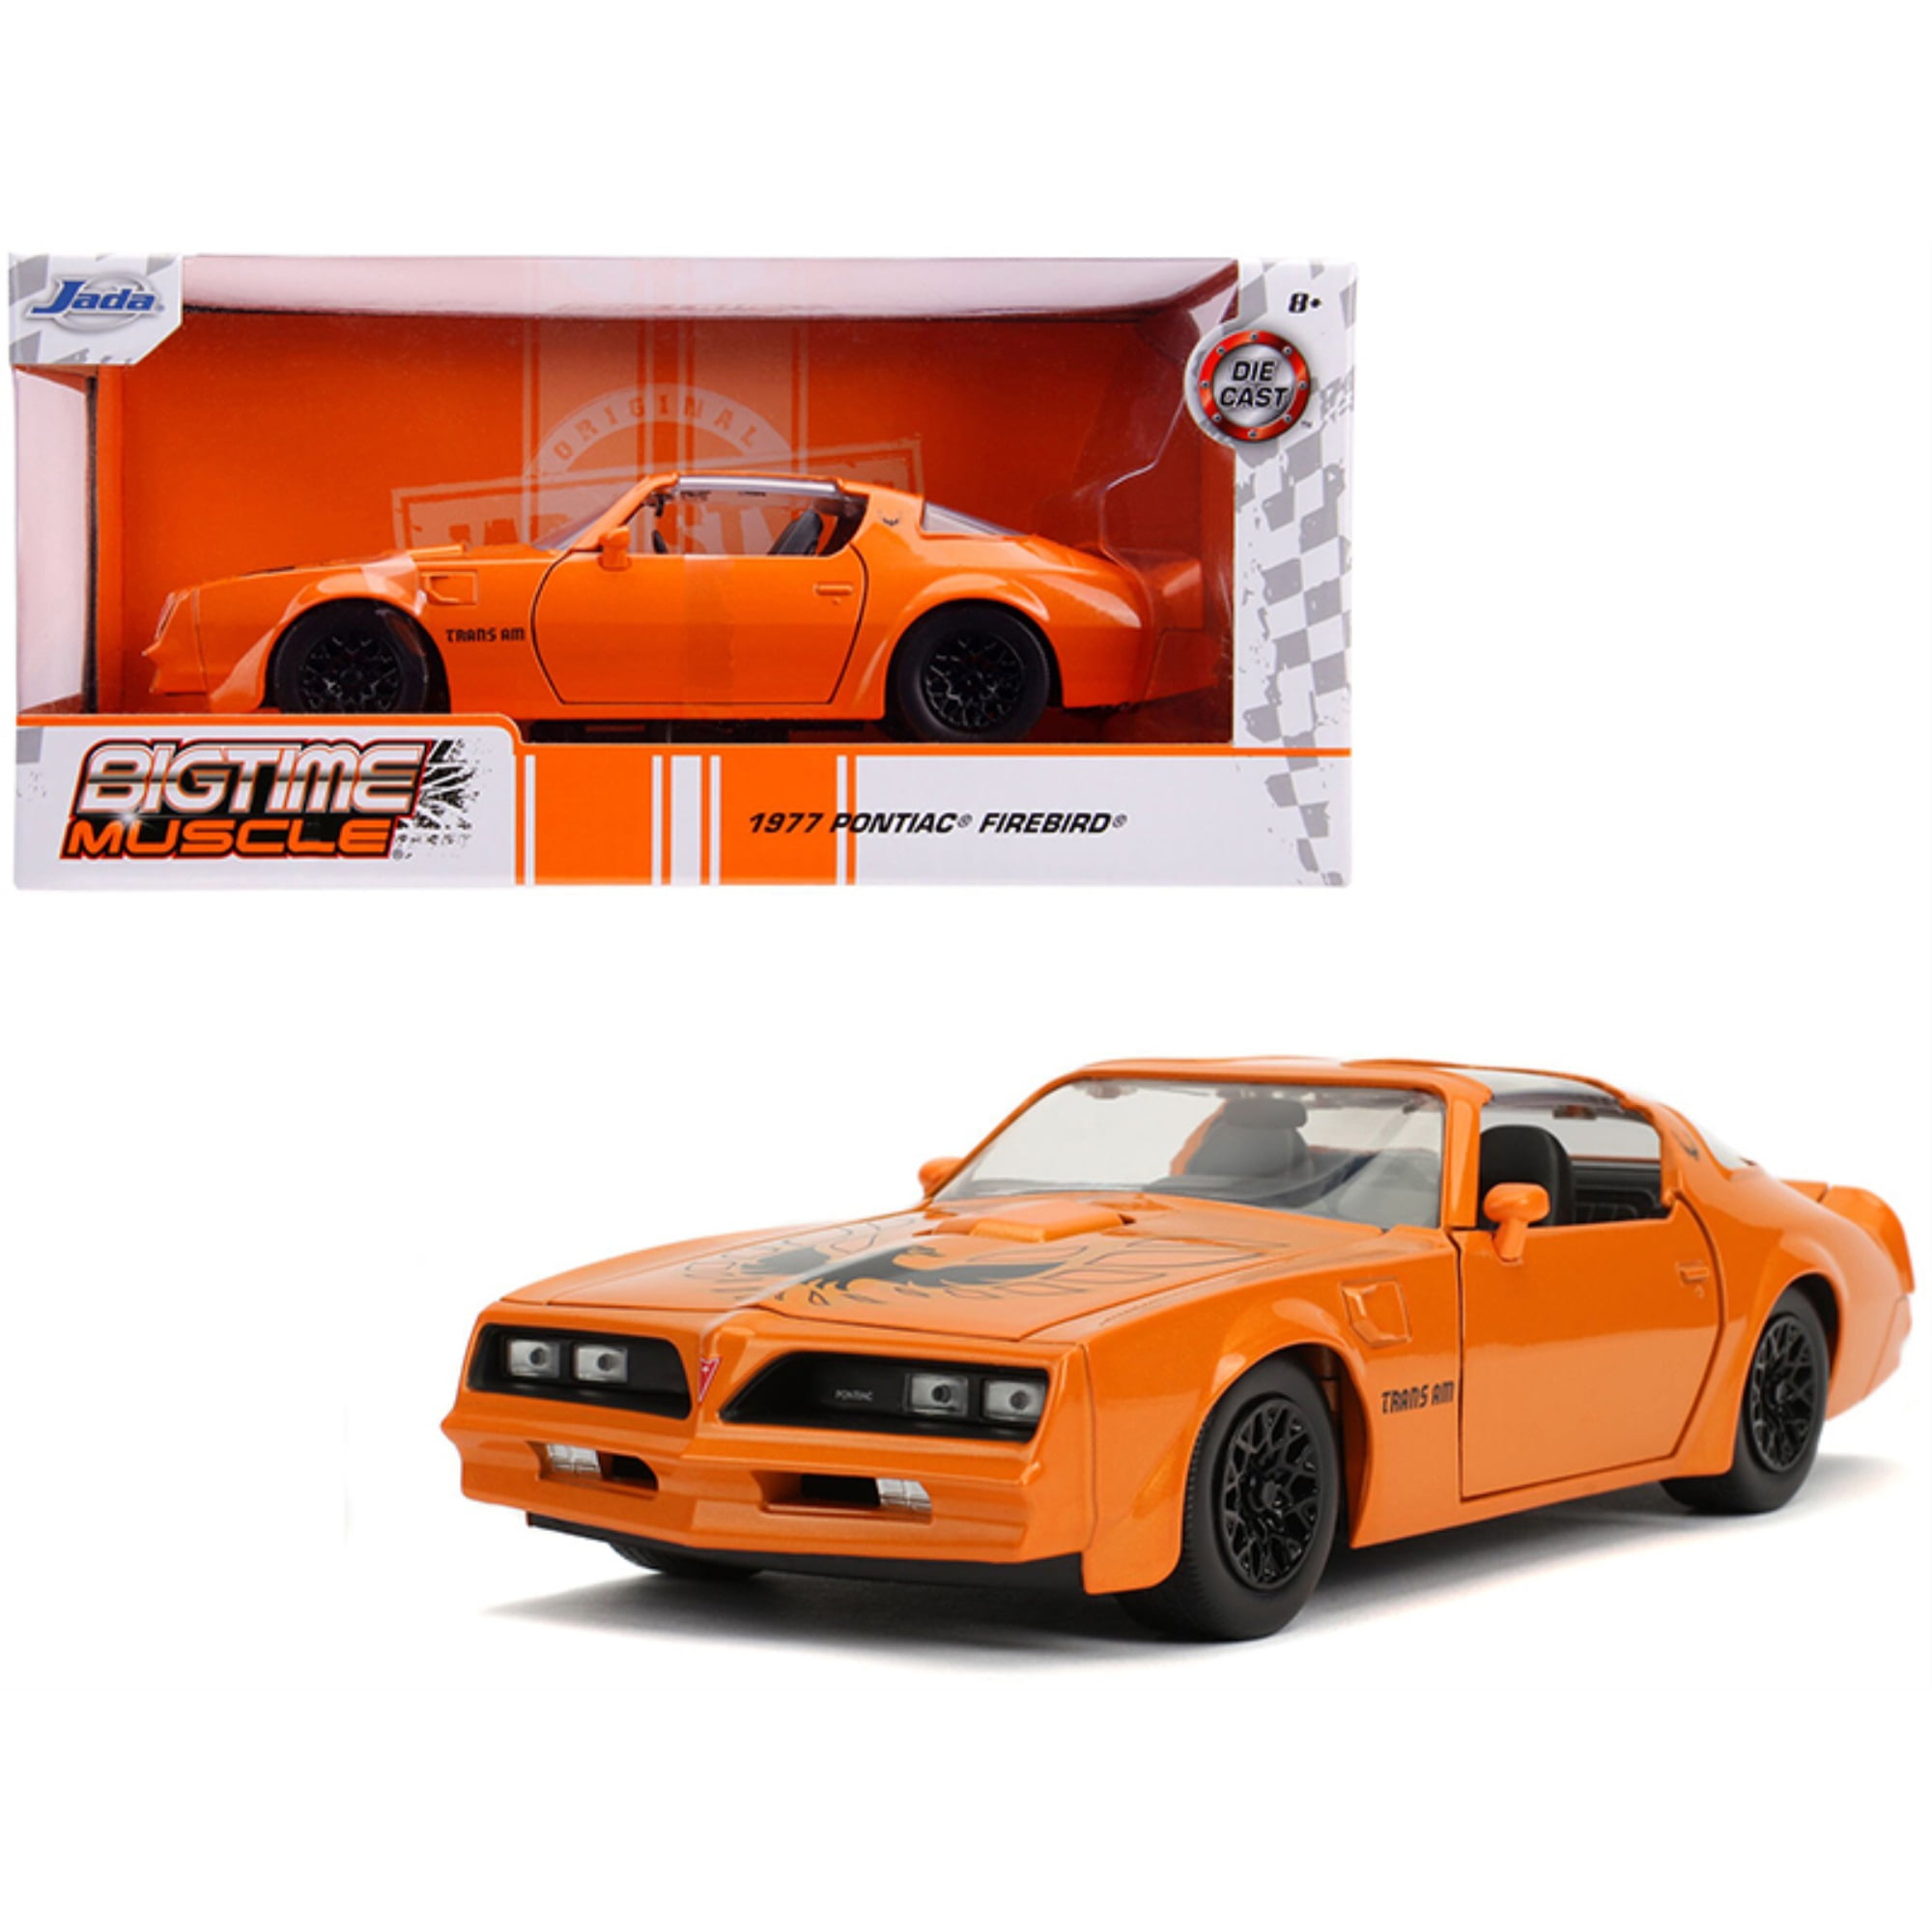 Jada Toys 1970 Ford Mustang Boss 429 With Hood BIGTIME Muscle 1 by 24 Diecast MO for sale online 